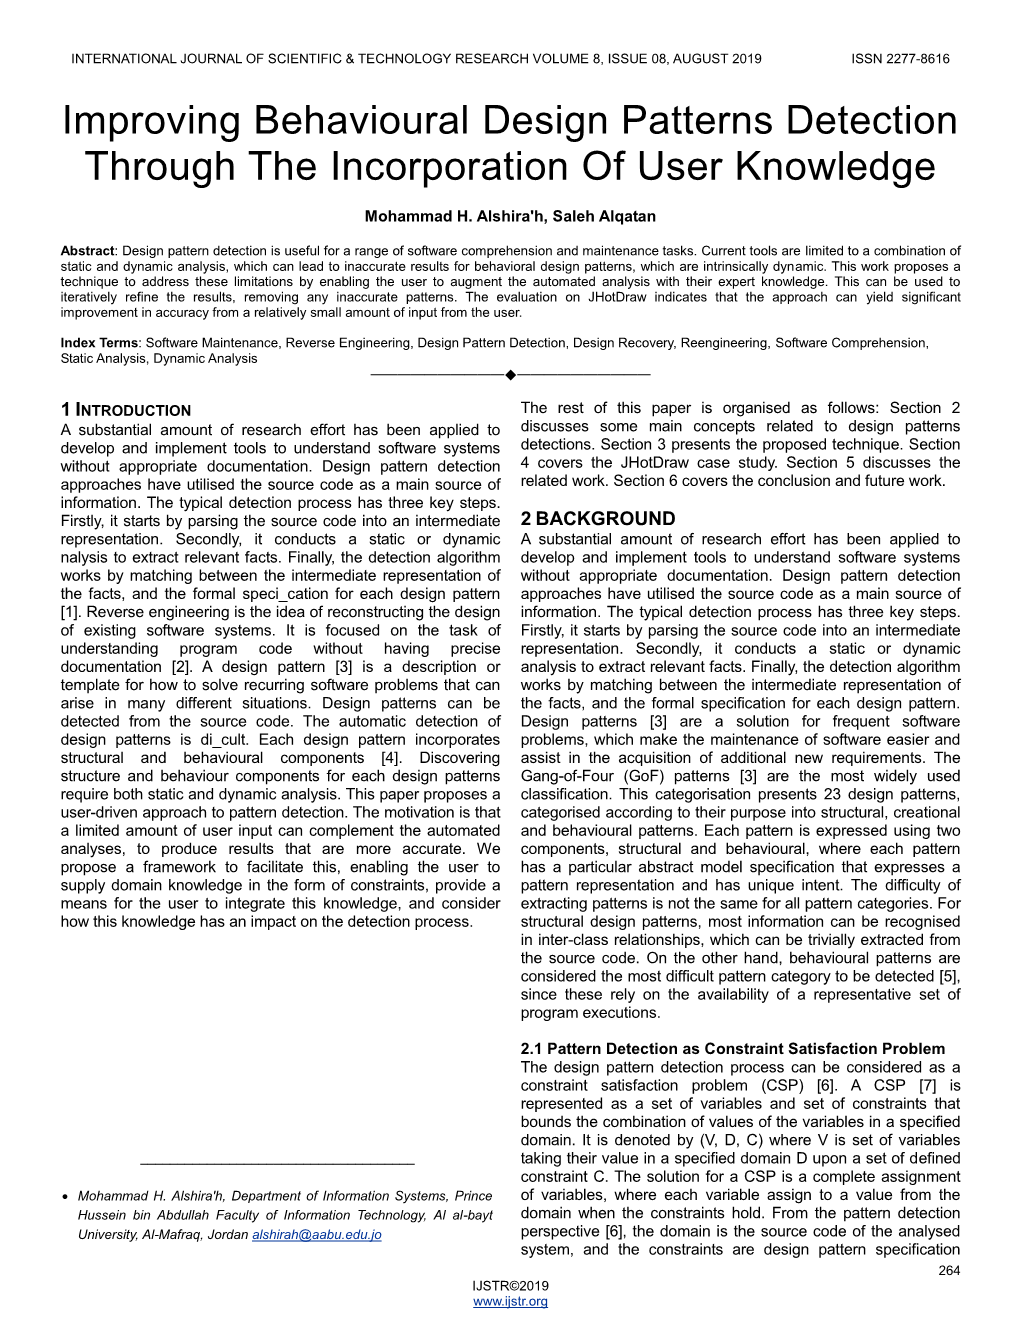 Improving Behavioural Design Patterns Detection Through the Incorporation of User Knowledge